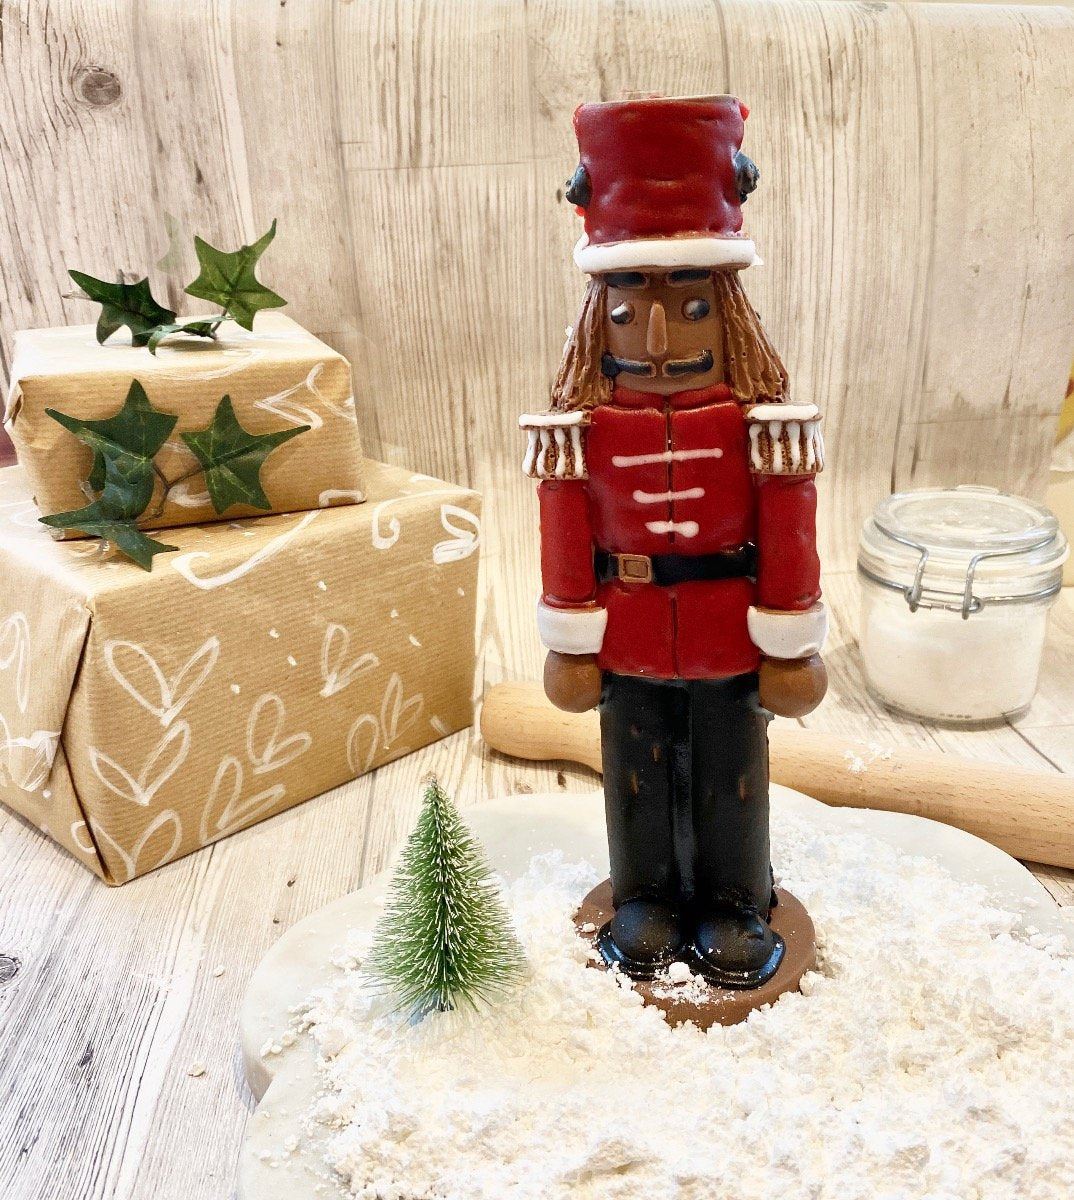 Decorate Your Own Chocolate Nutcracker